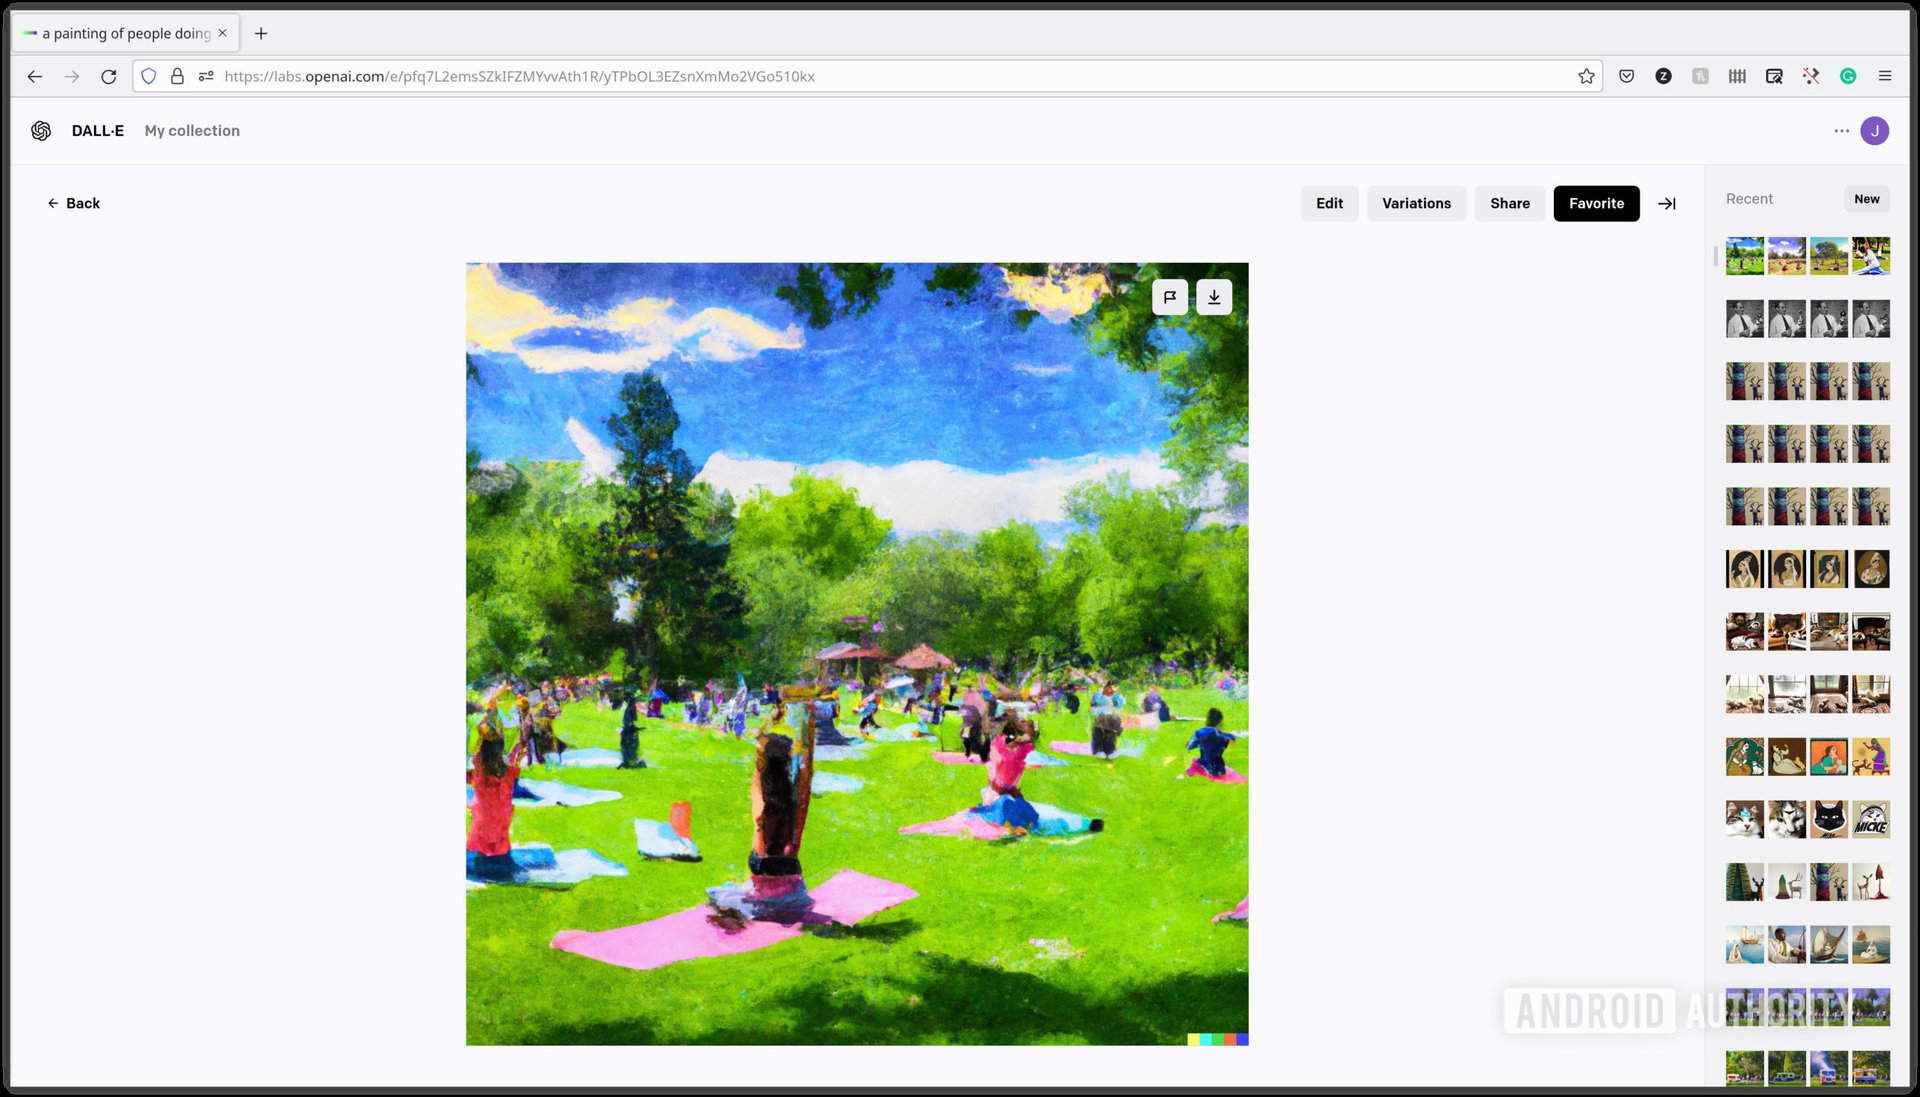 A screenshot of a DALL-E 2 generate image from the prompt "a painting of people doing yoga in a park on a sunny day".